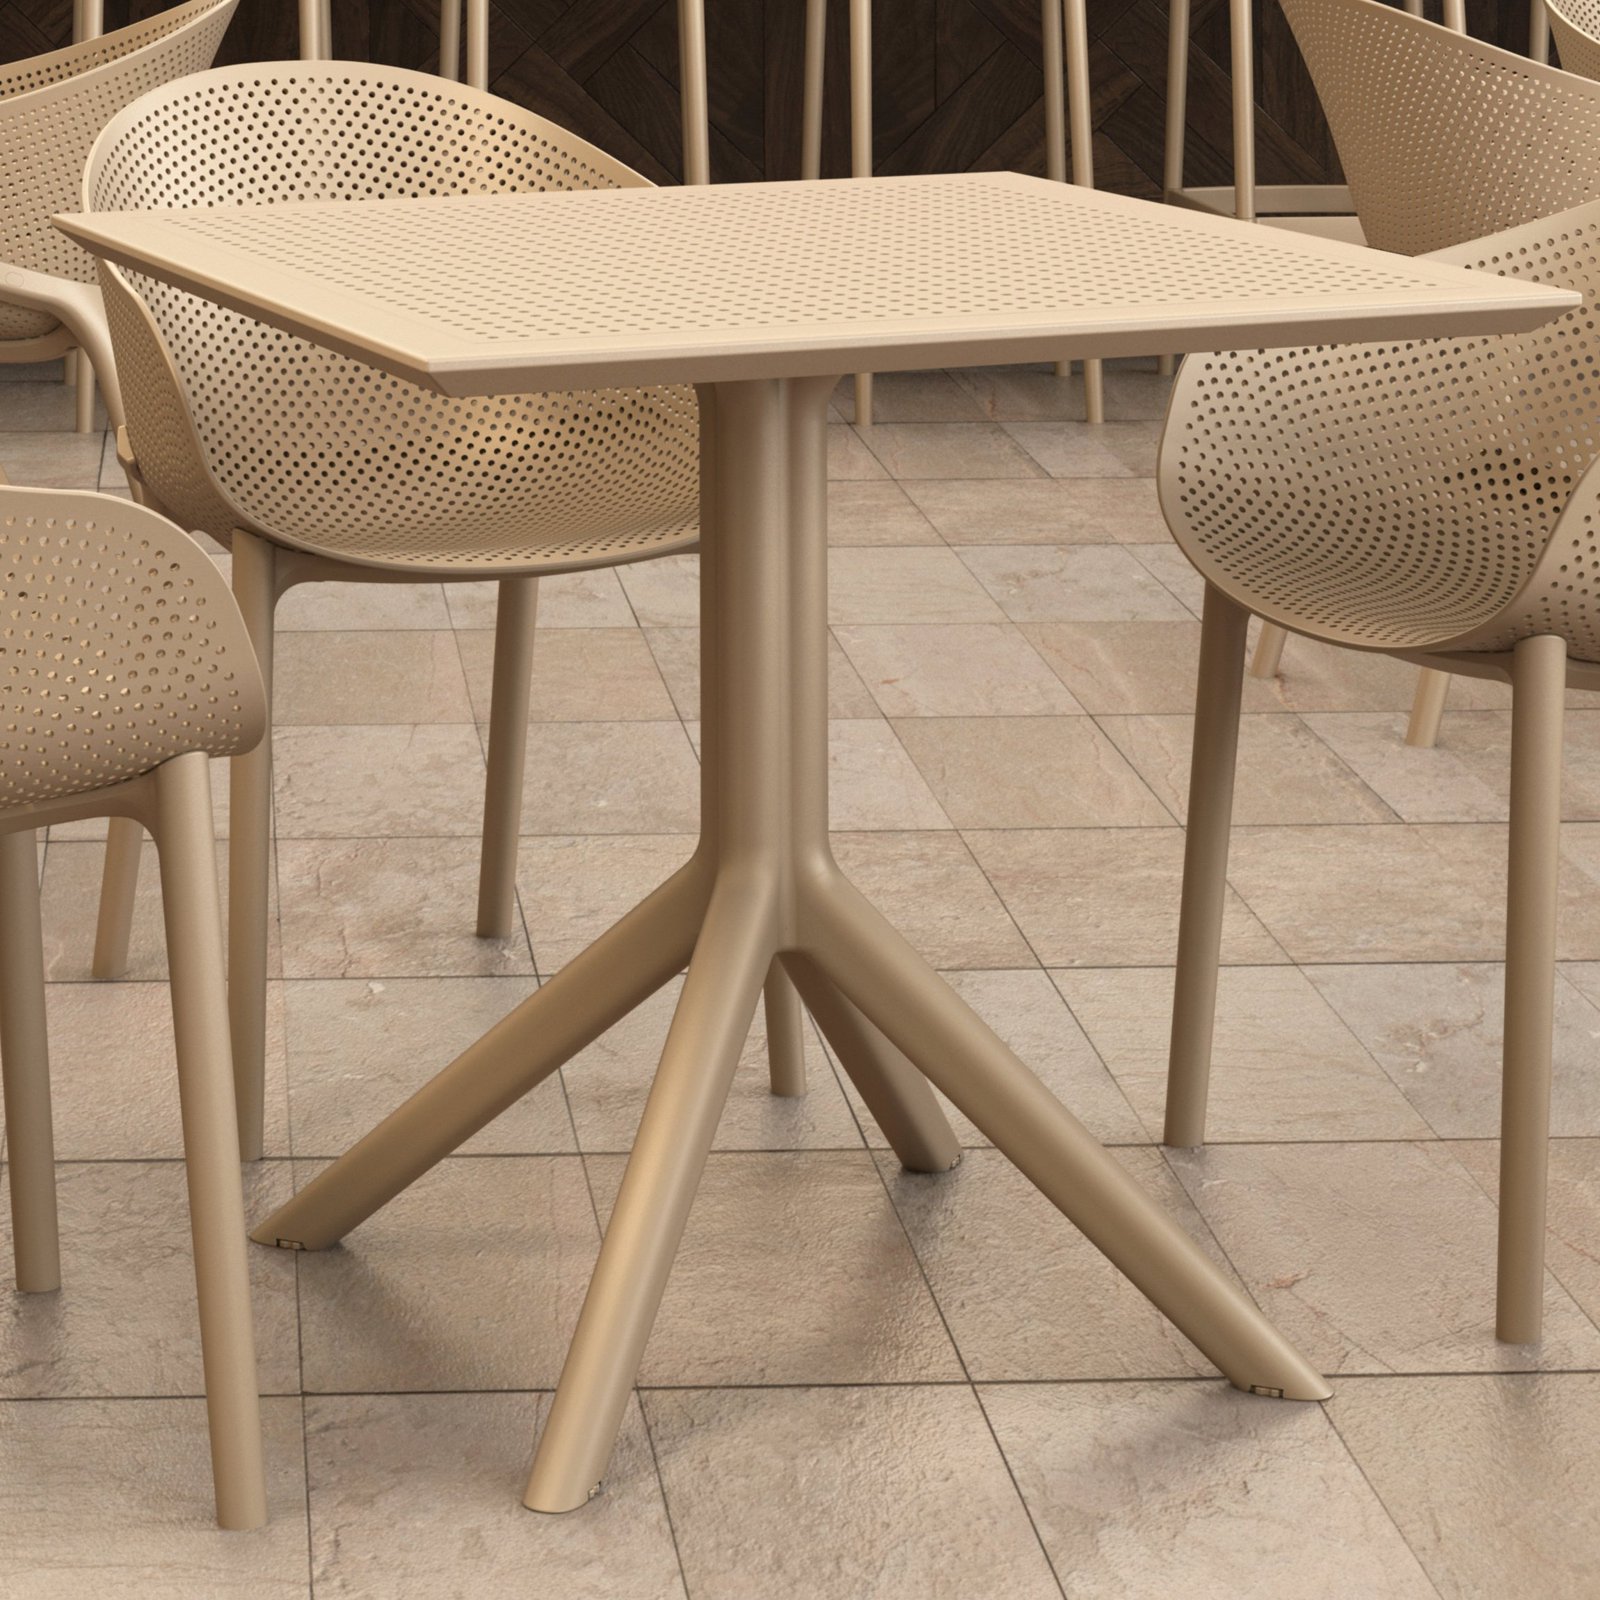 Compamia Sky 32" Square Patio Bistro Table in Taupe - image 4 of 8